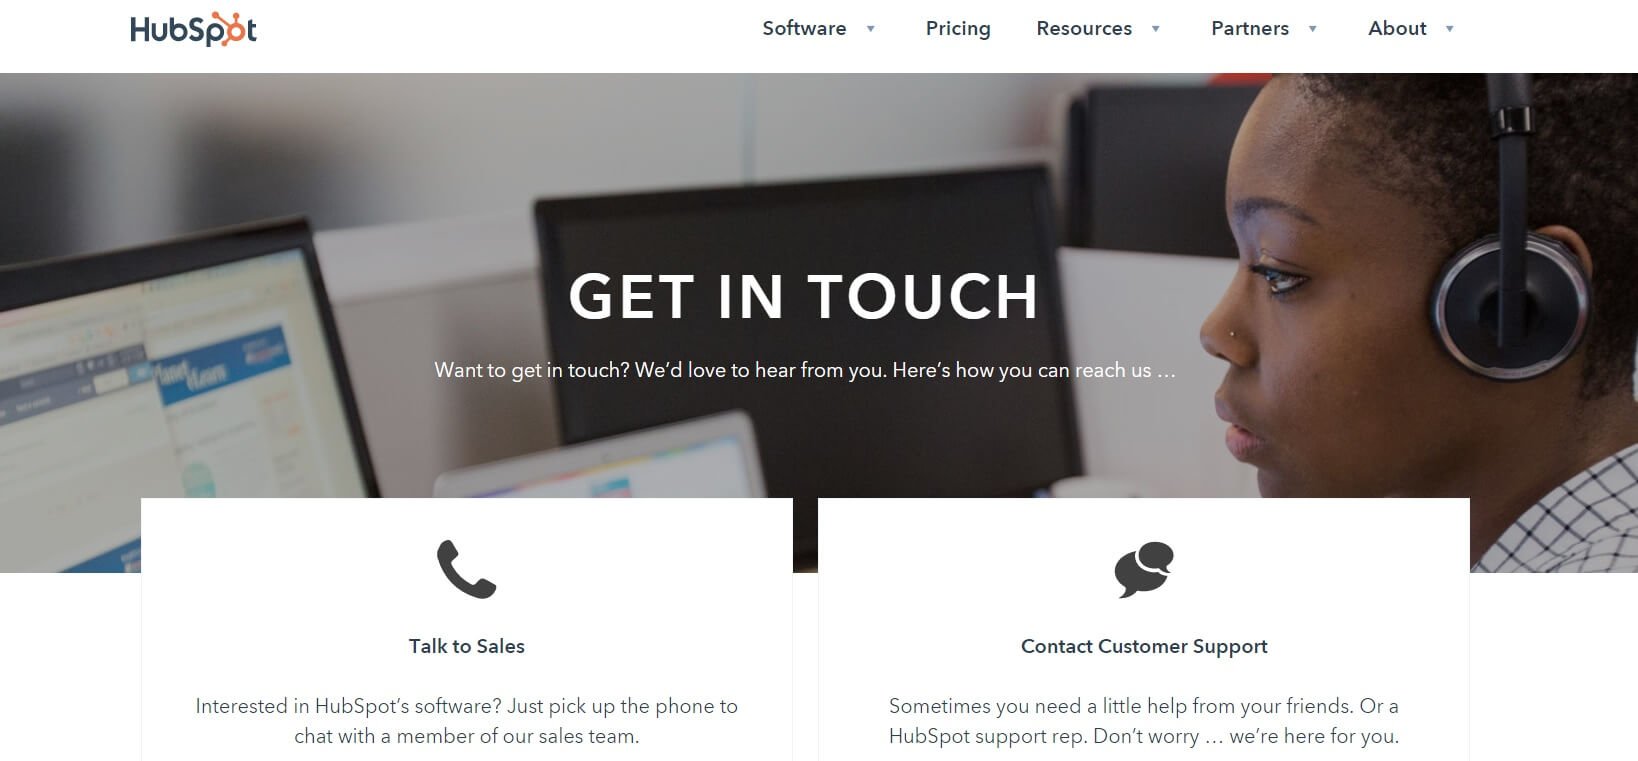 The HubSpot contact page